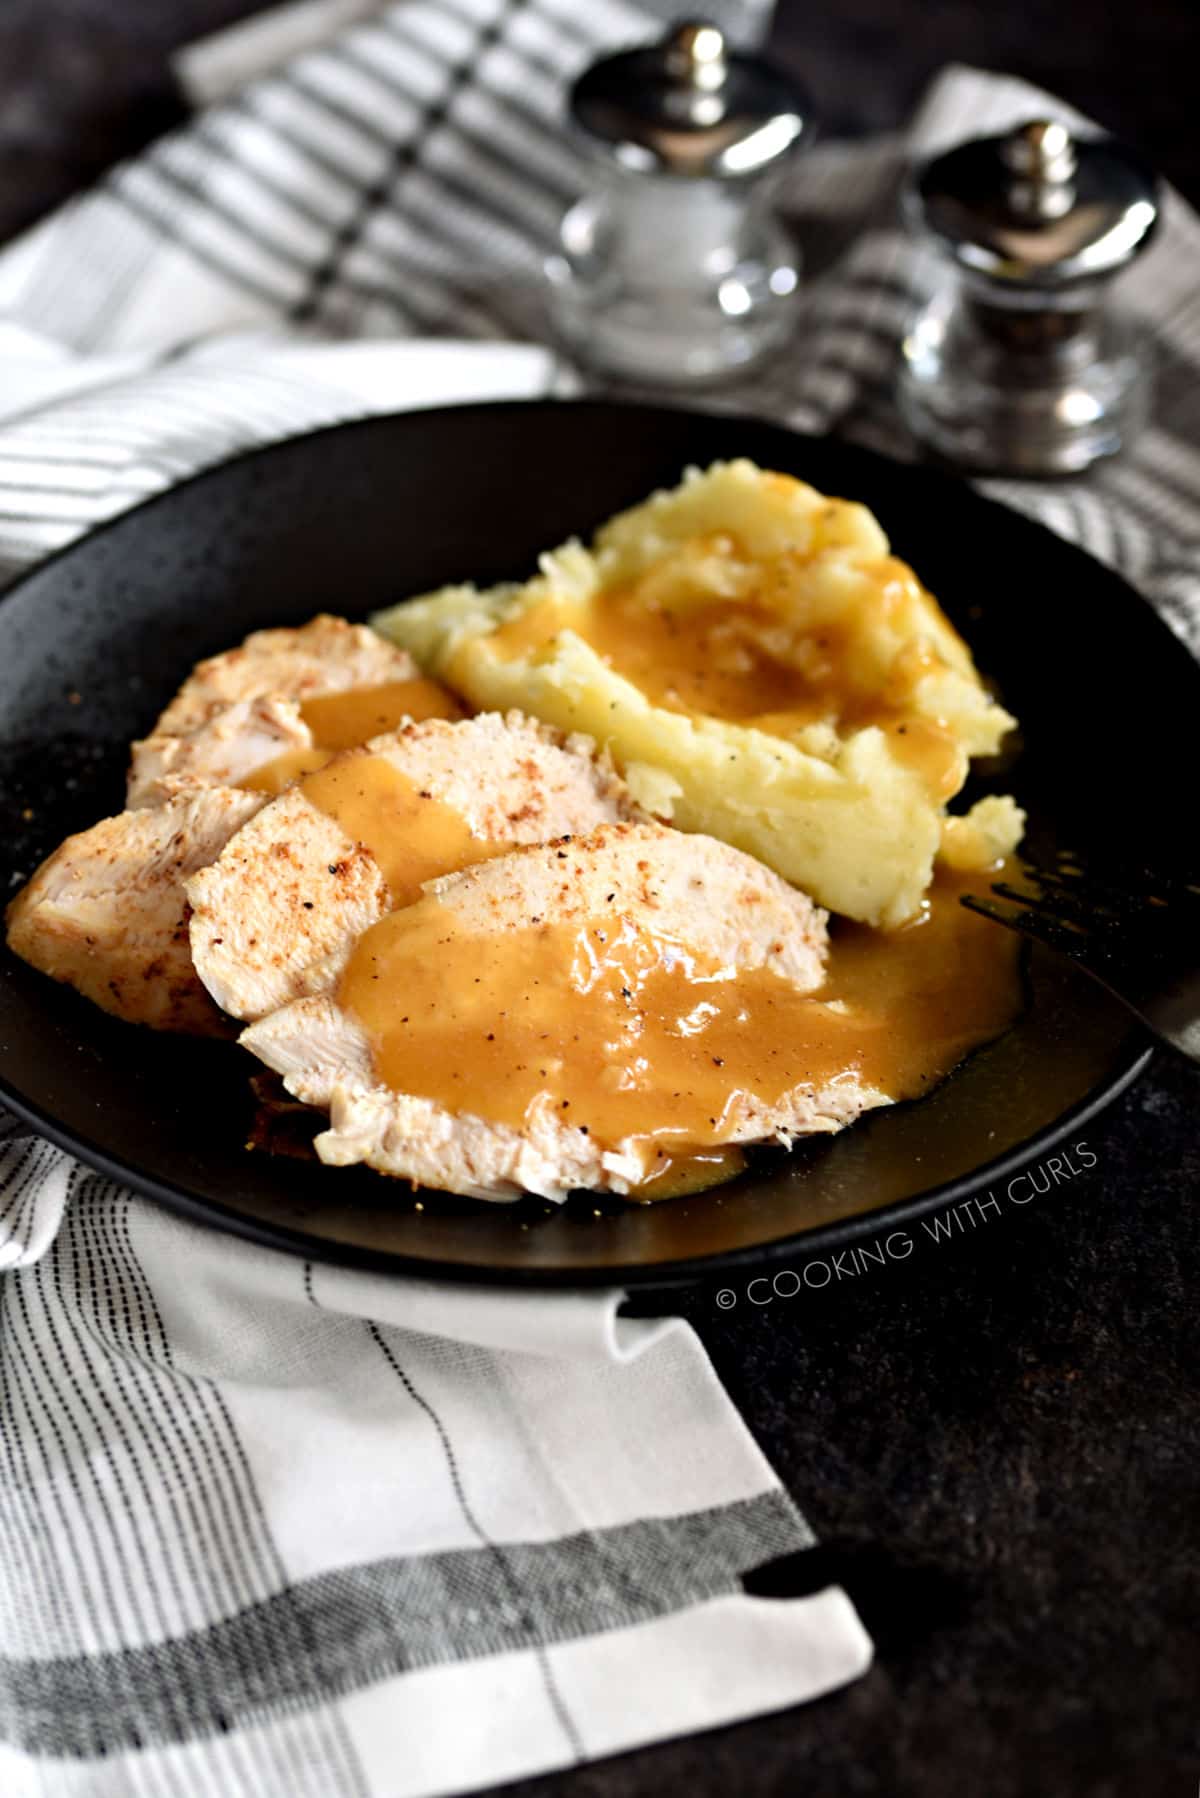 Turkey Gravy poured over sliced turkey and mashed potatoes on a black plate.